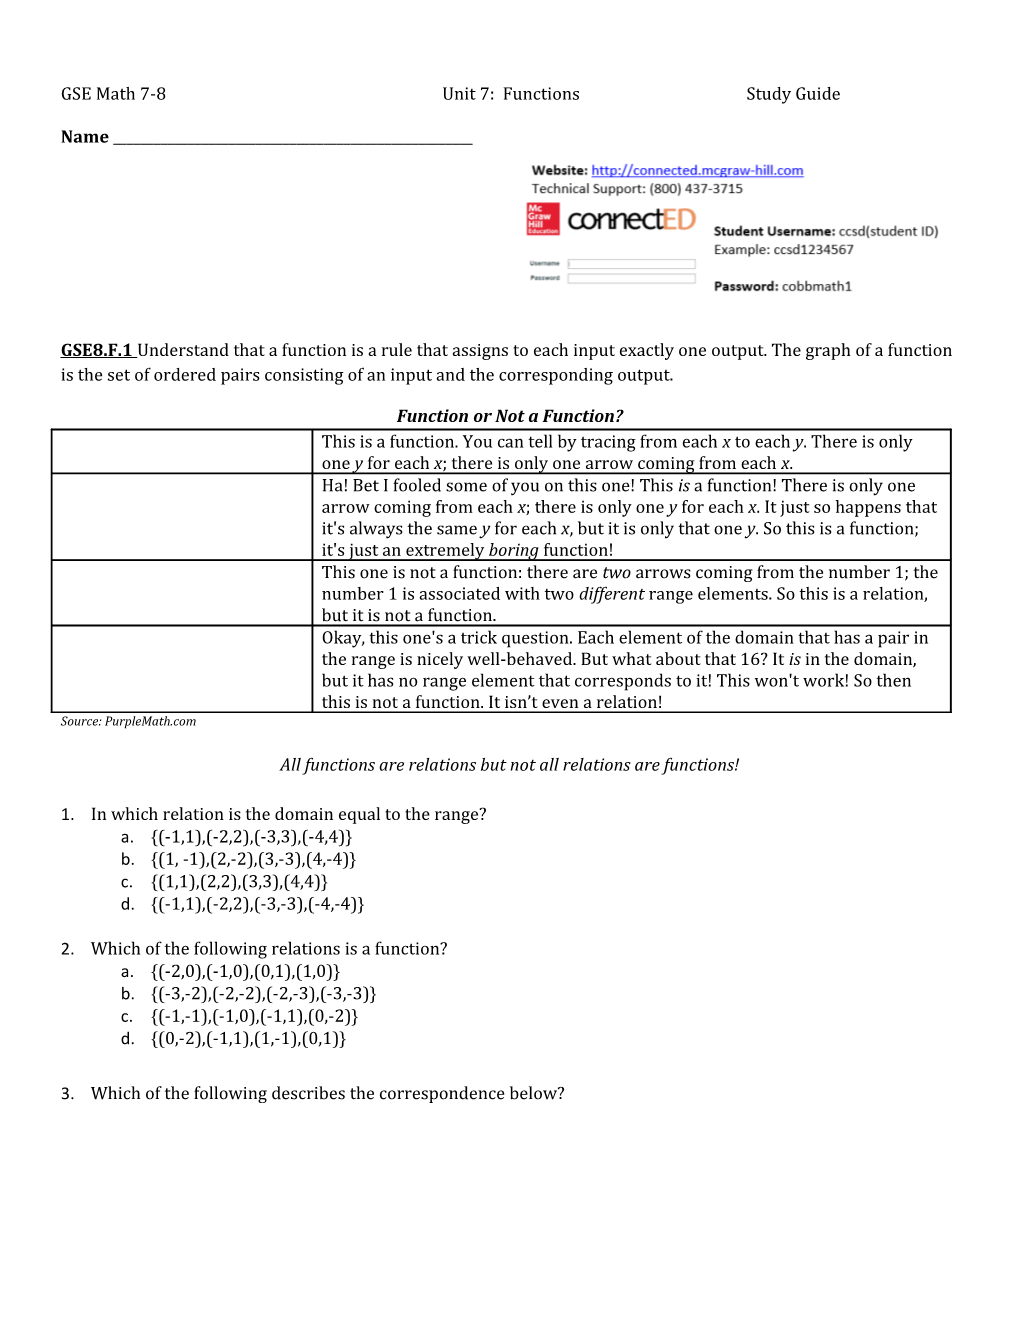 GSE Math 7-8 Unit 7: Functionsstudy Guide